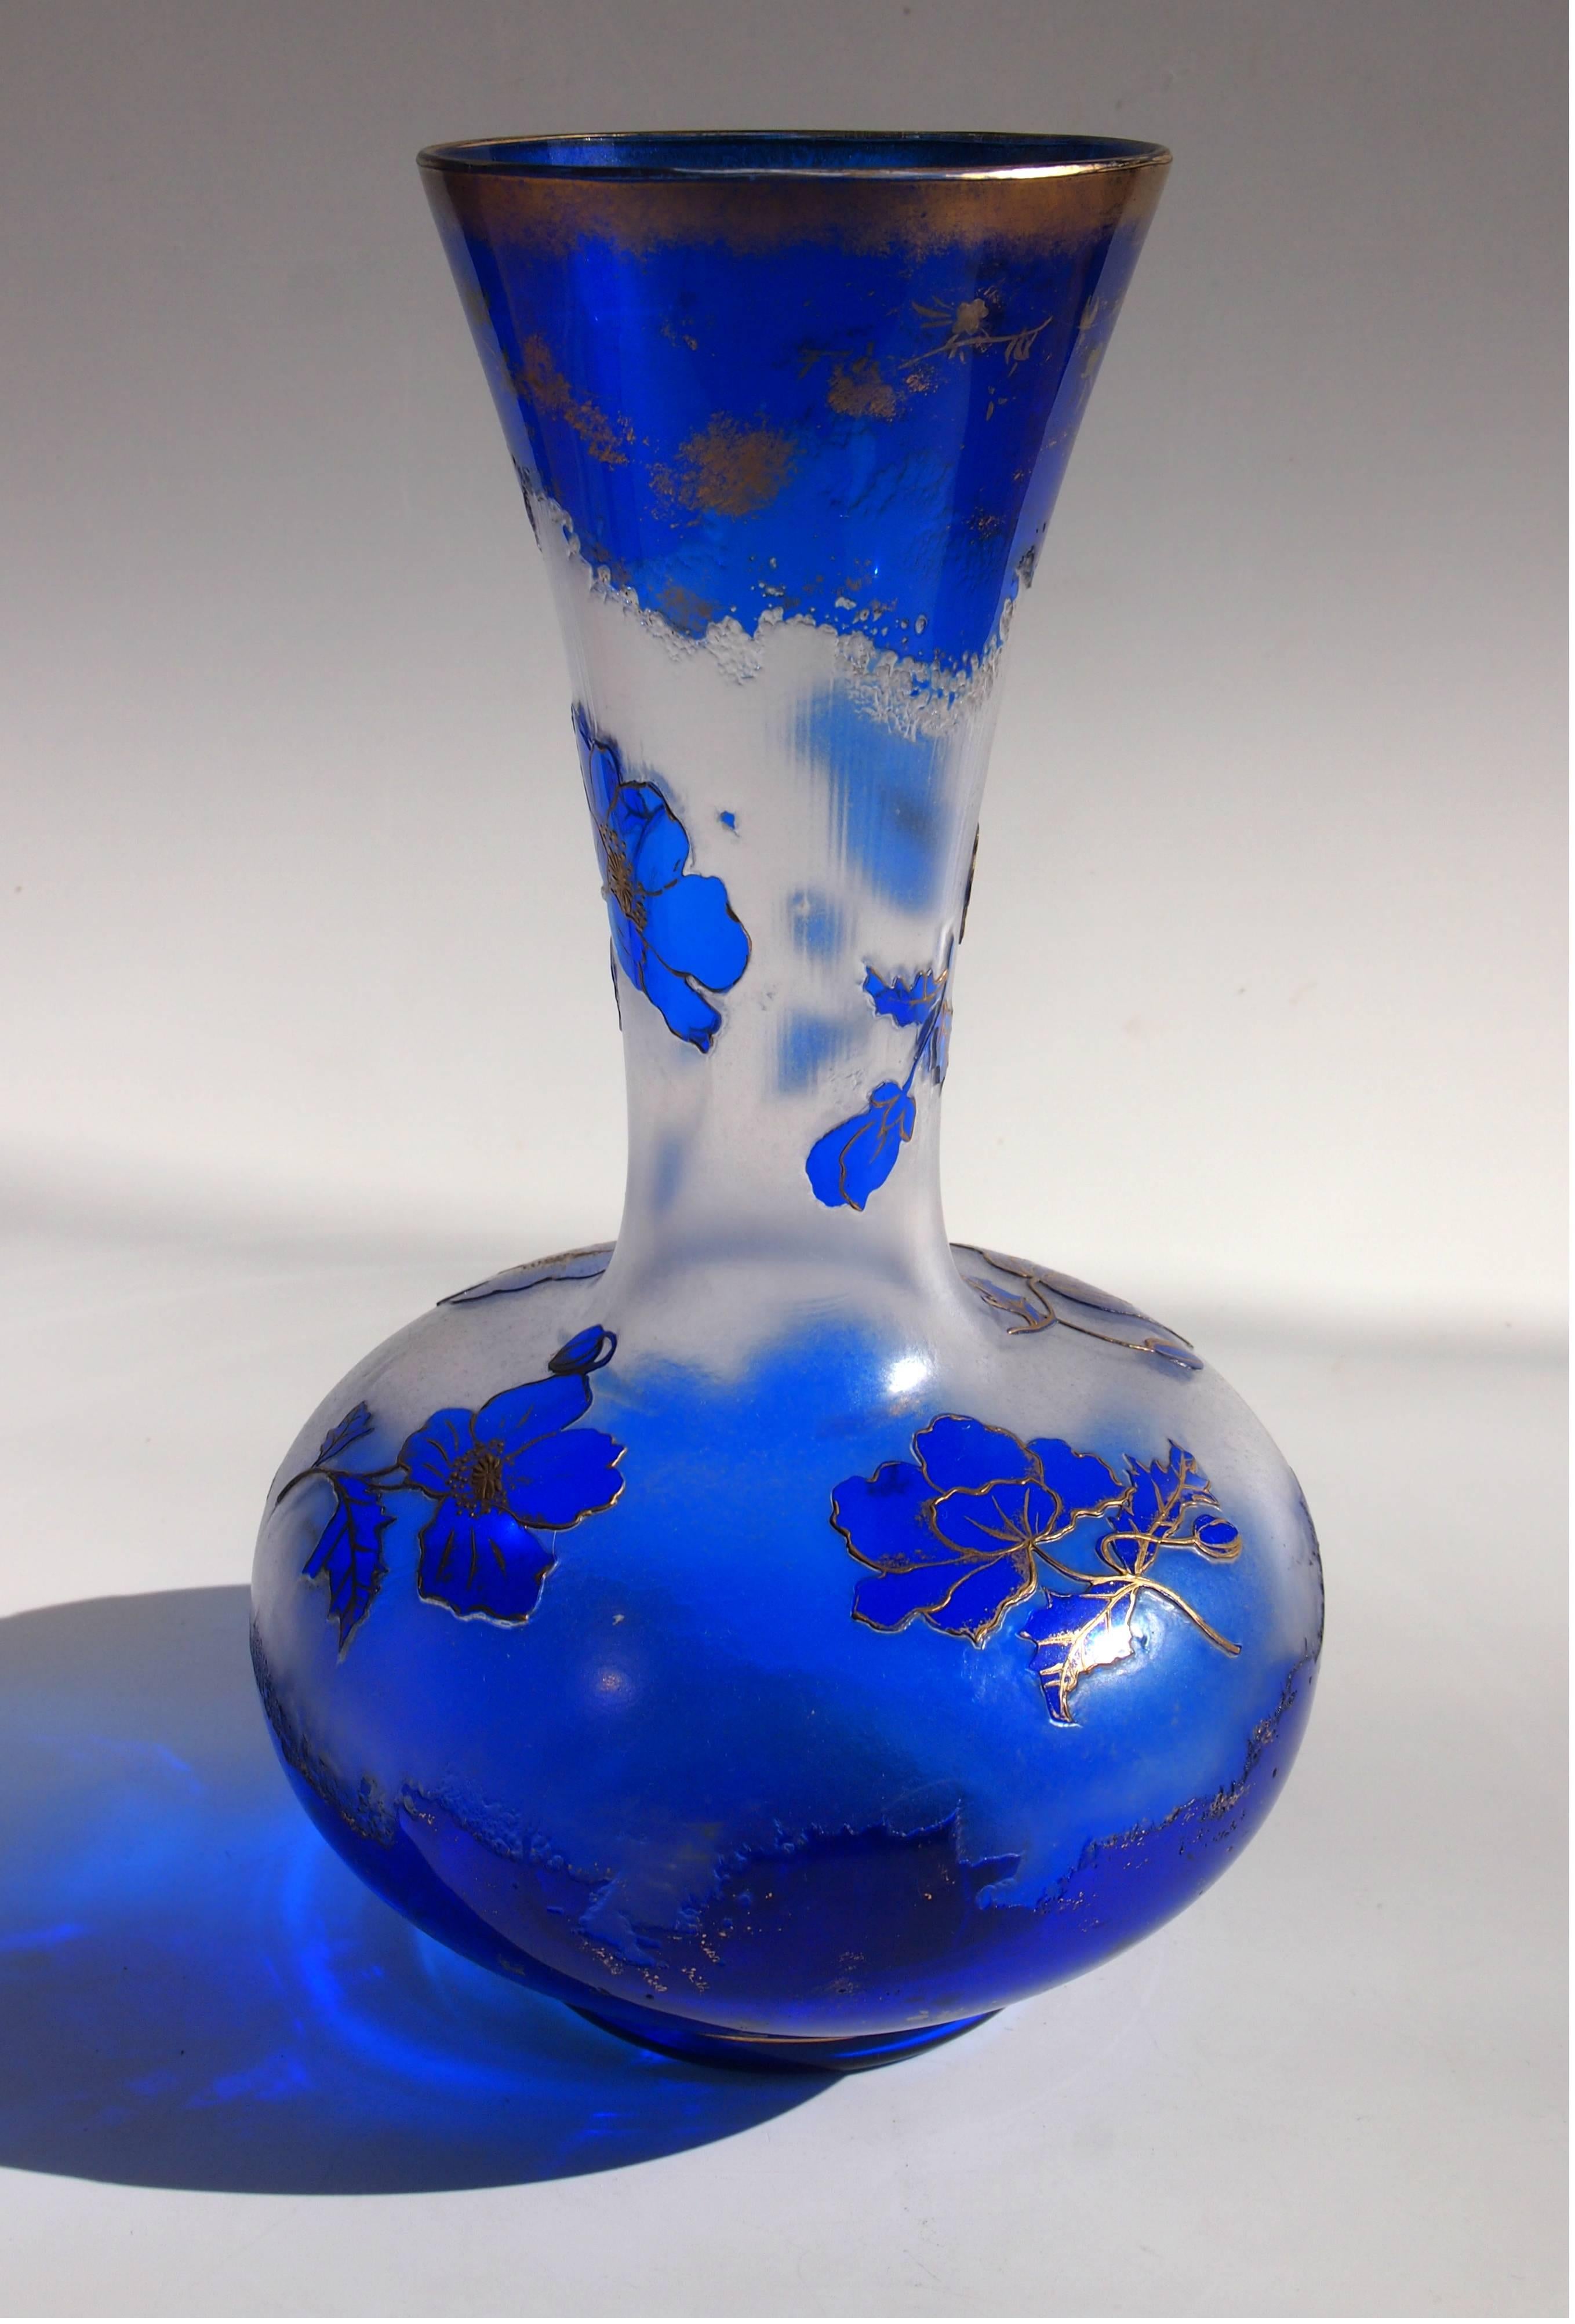 A vibrant Art Nouveau blue over clear Harrach cameo vase. Depicting flowers highlighted with gilding. This style of Cameo was taken by Harrach to the 1900 Paris exhibition. Their stylized cameo technique employed an icicle effect -visible just below